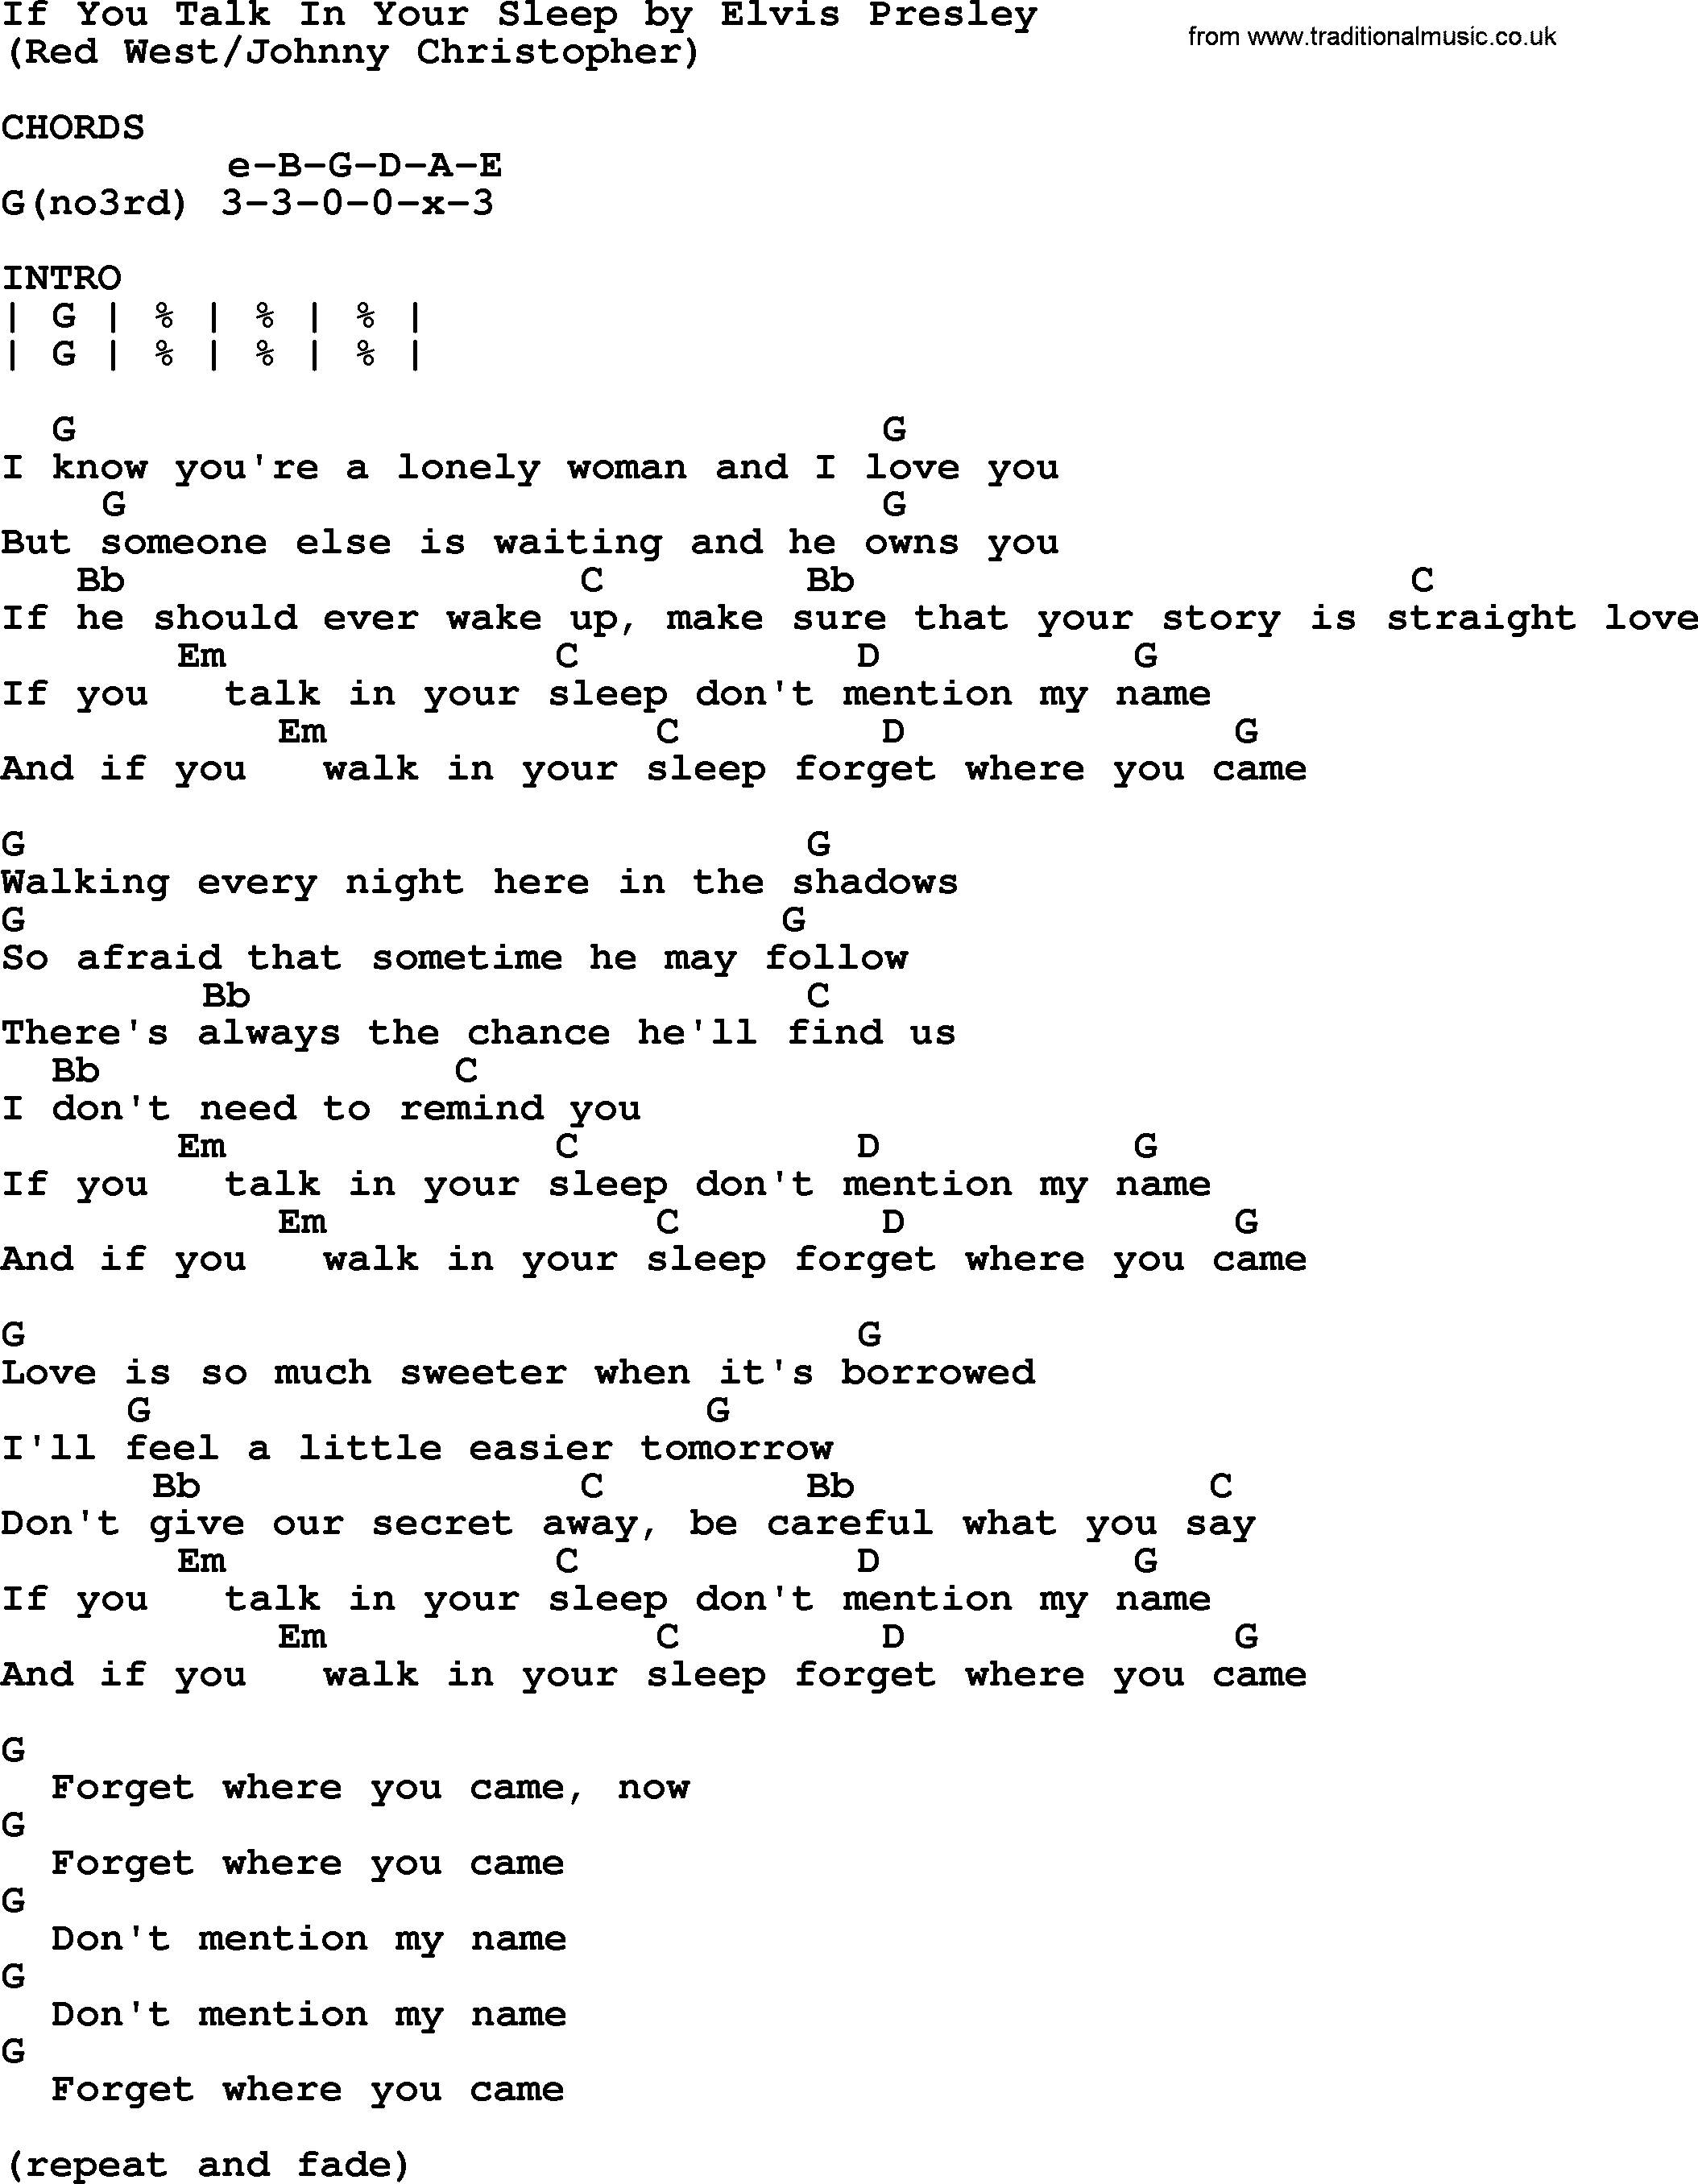 Elvis Presley song: If You Talk In Your Sleep, lyrics and chords